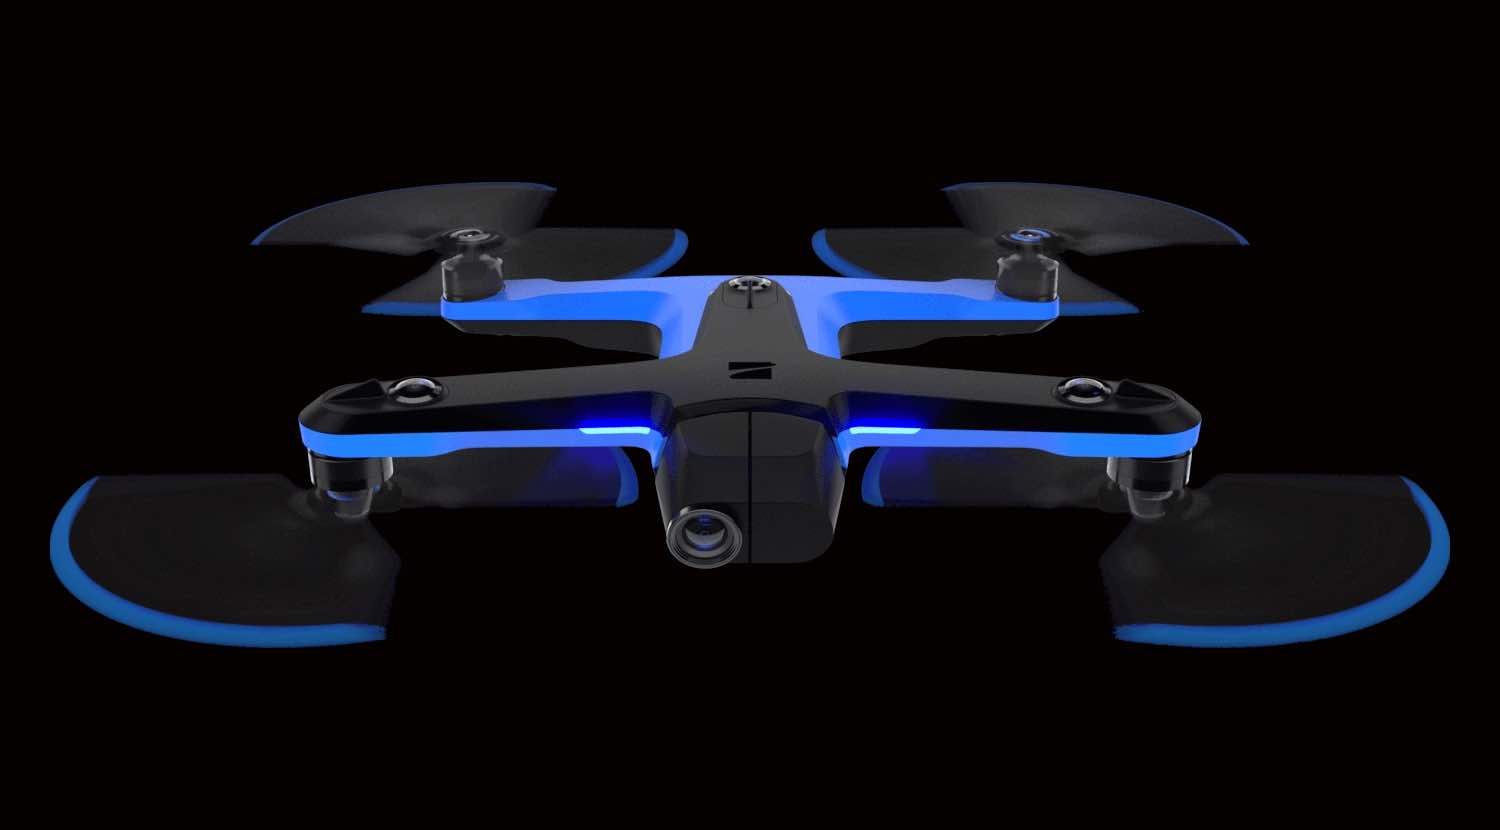 skydio 2 drone uses six 4k cameras to avoid any obstacle while still flying at full speed and following you anywhere